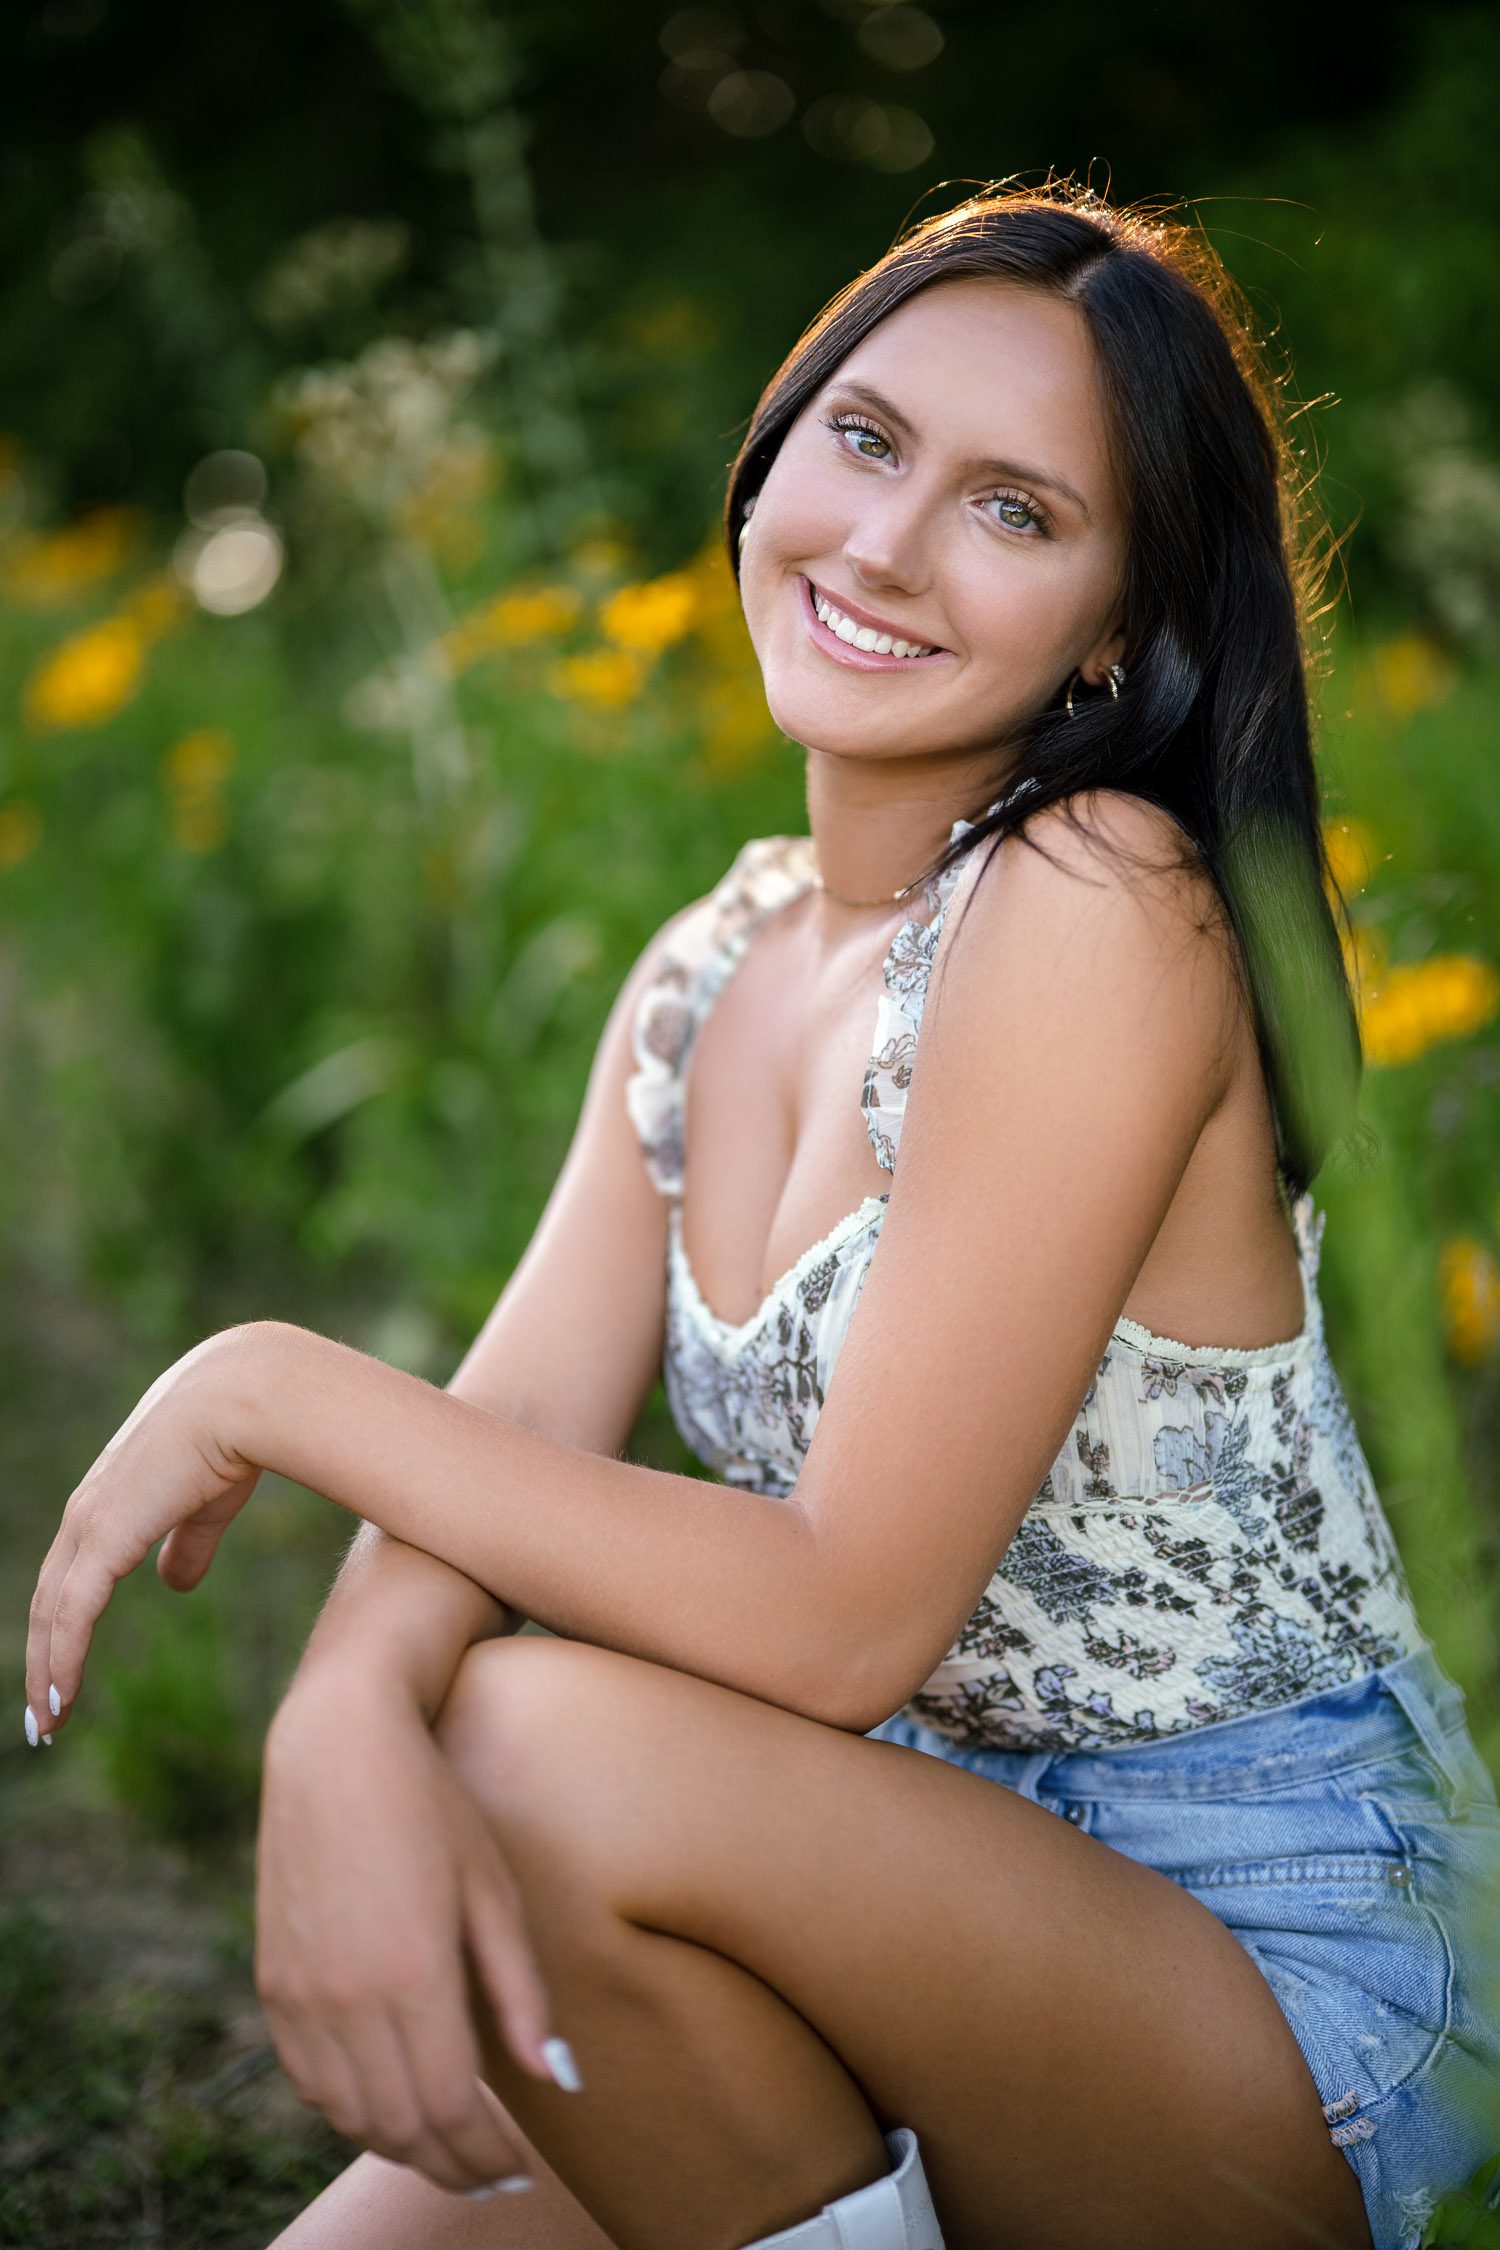 Columbia Missouri senior girl smiling while surrounded by green and yellow flowers.